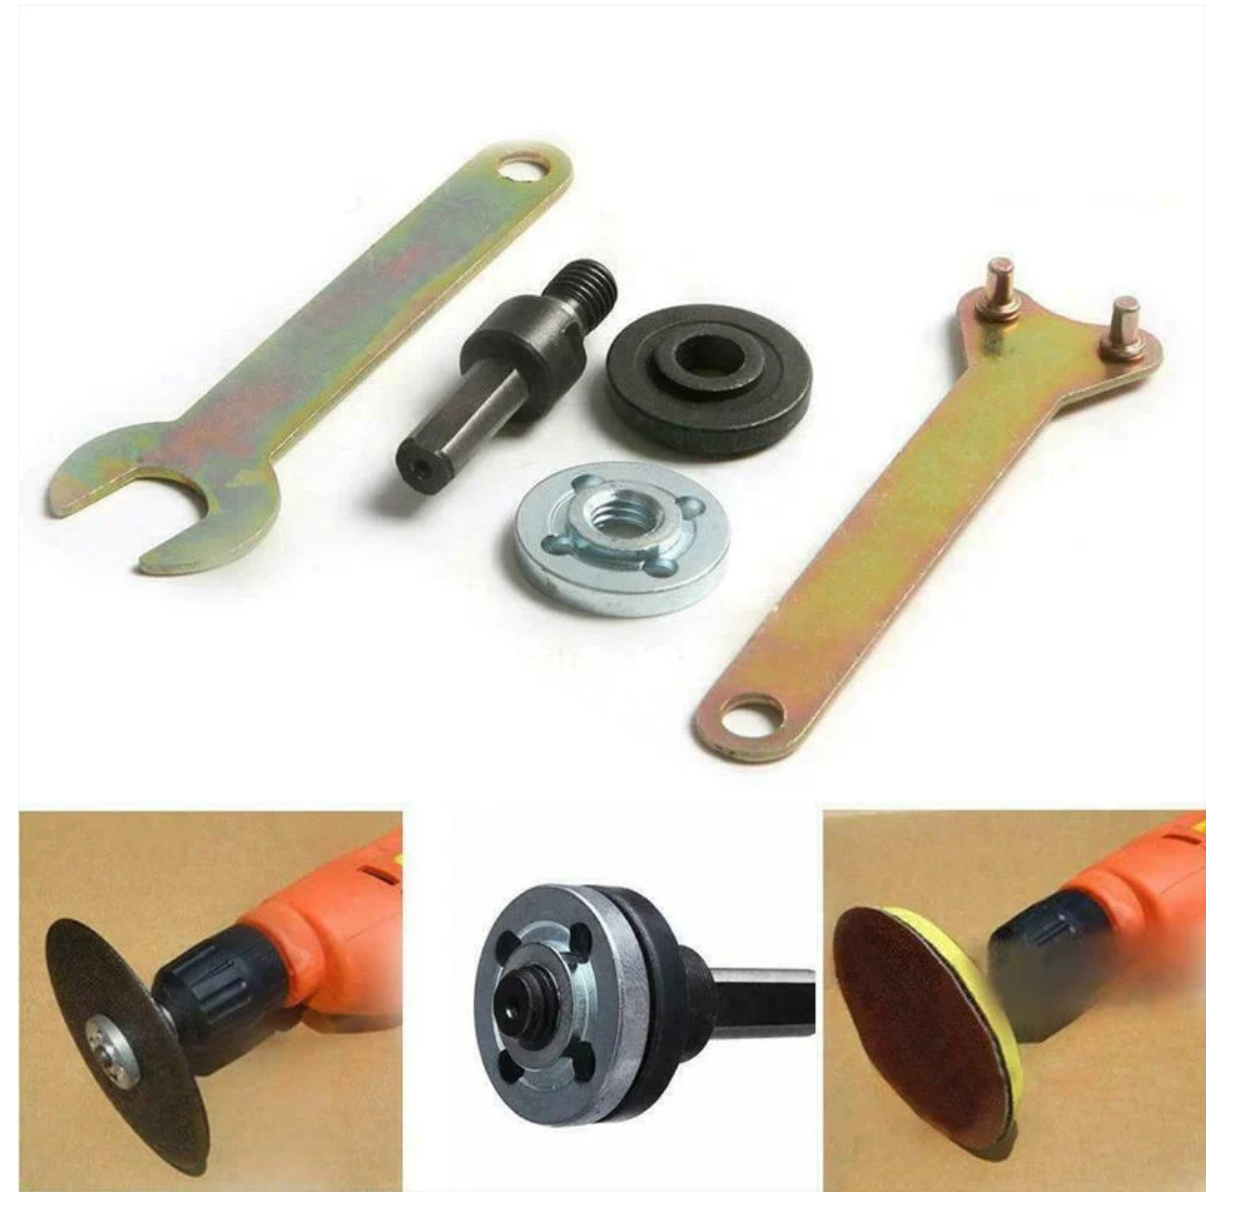 Electric drill angle grinder connecting rod set